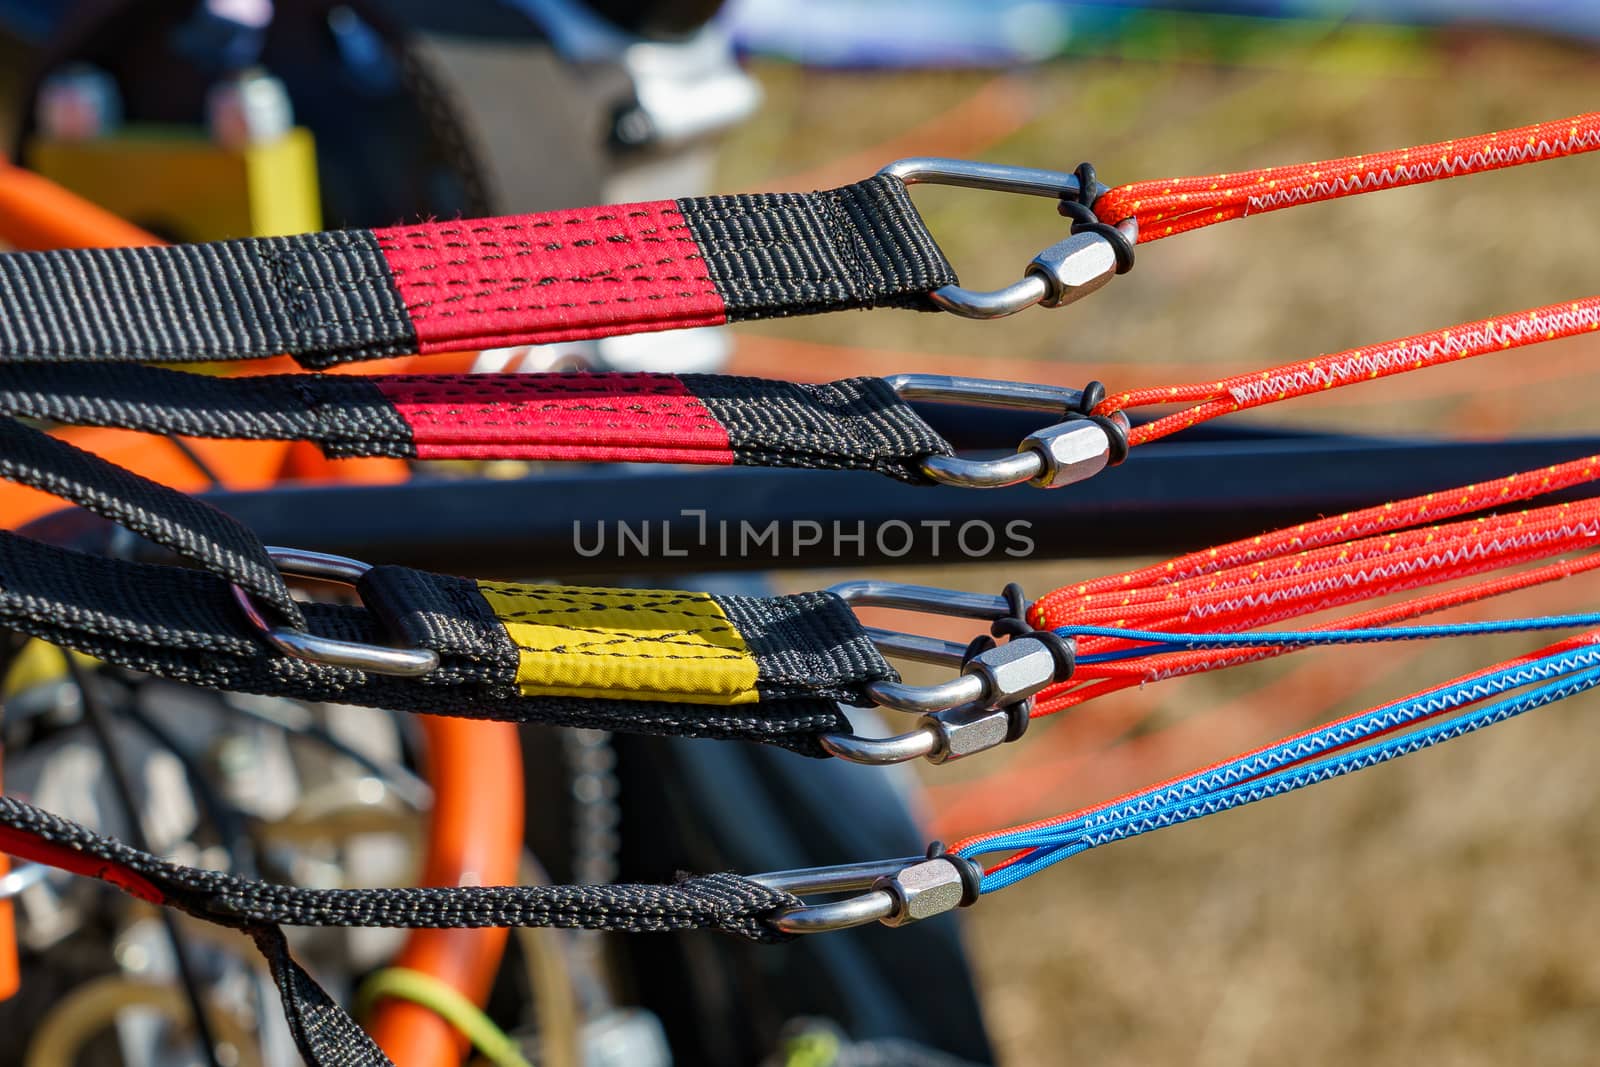 paraglider slings attached to the hull, carbines and cables of different colors